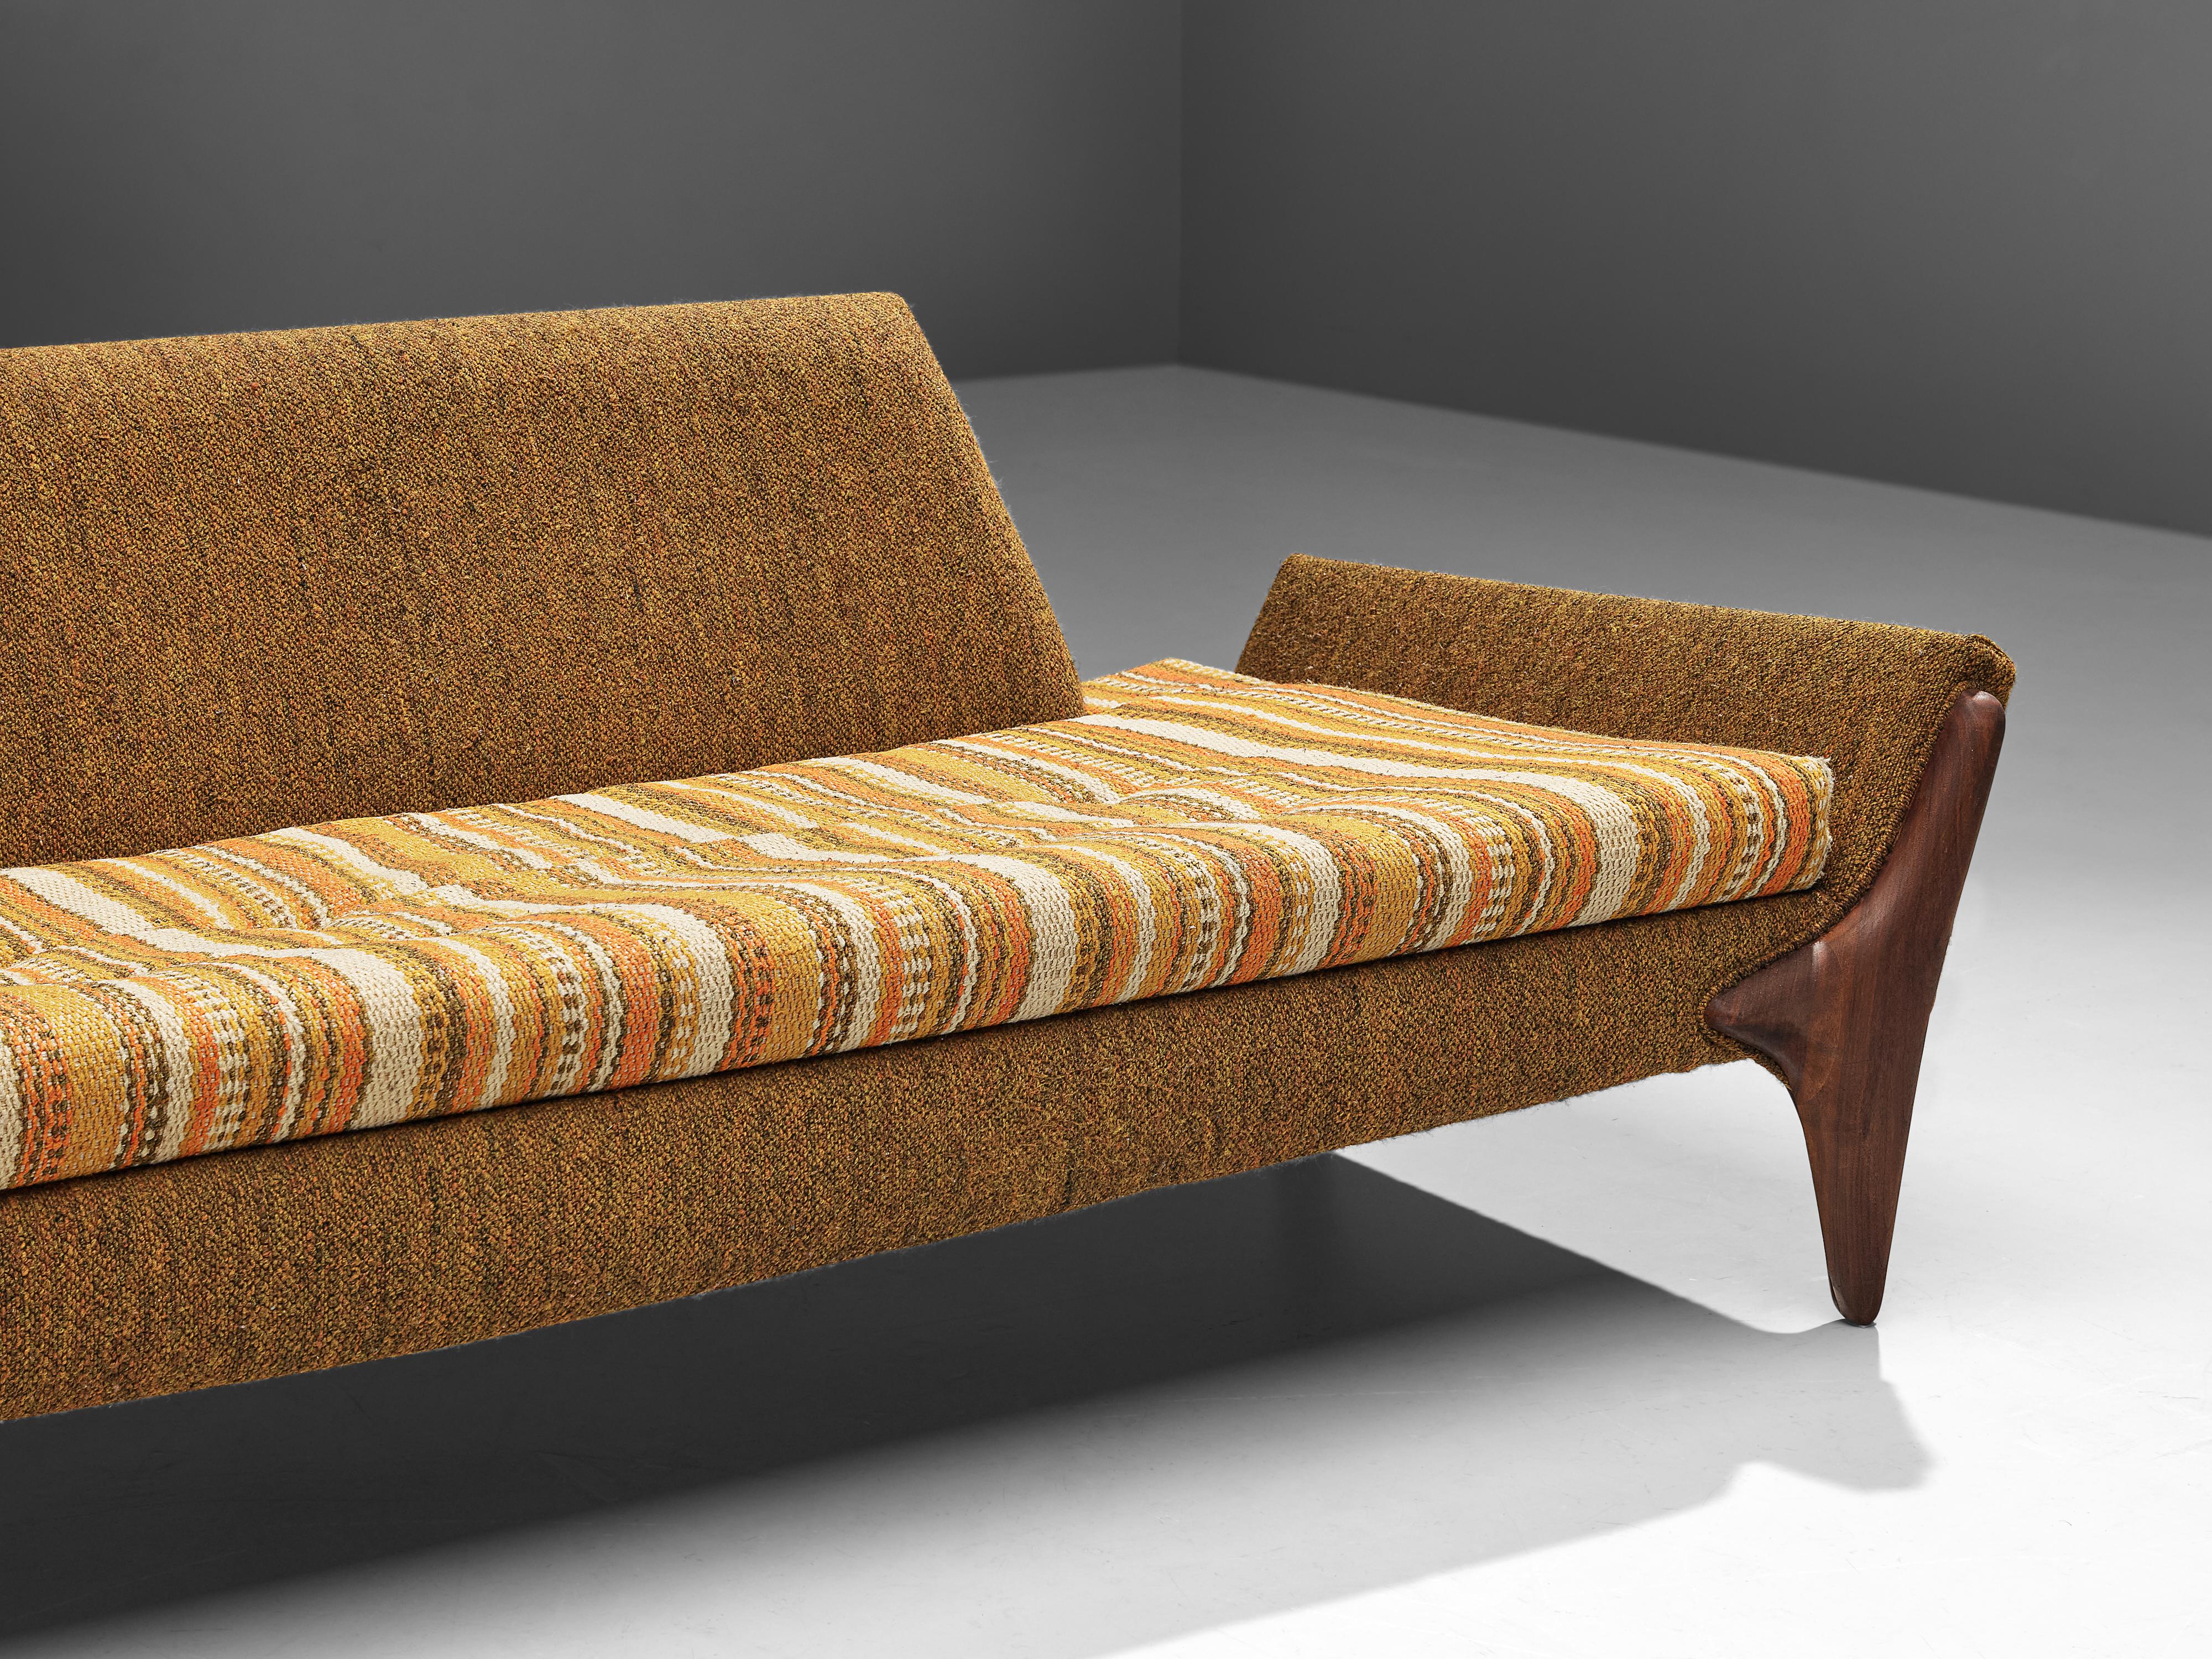 Mid-20th Century Adrian Pearsall Sofa in Ocher Yellow Striped Upholstery